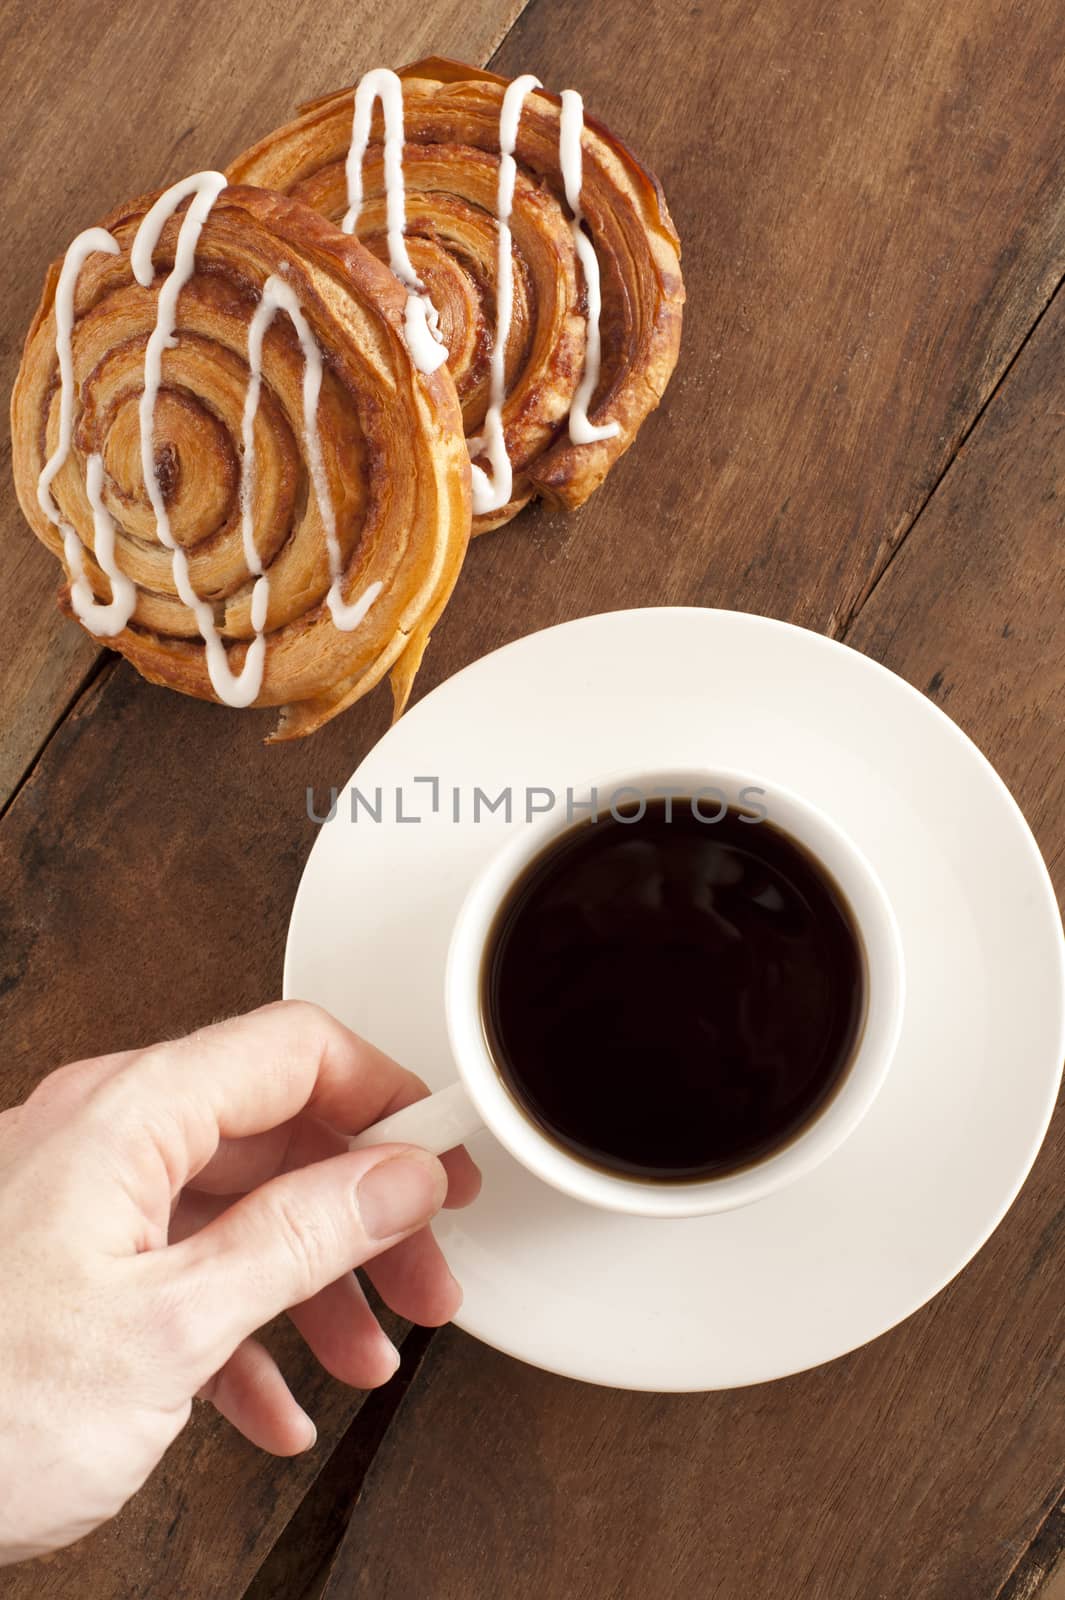 Overhead view of a mans hand reaching out to take a cup of rich espresso coffee and fresh Danish pastries for breakfast